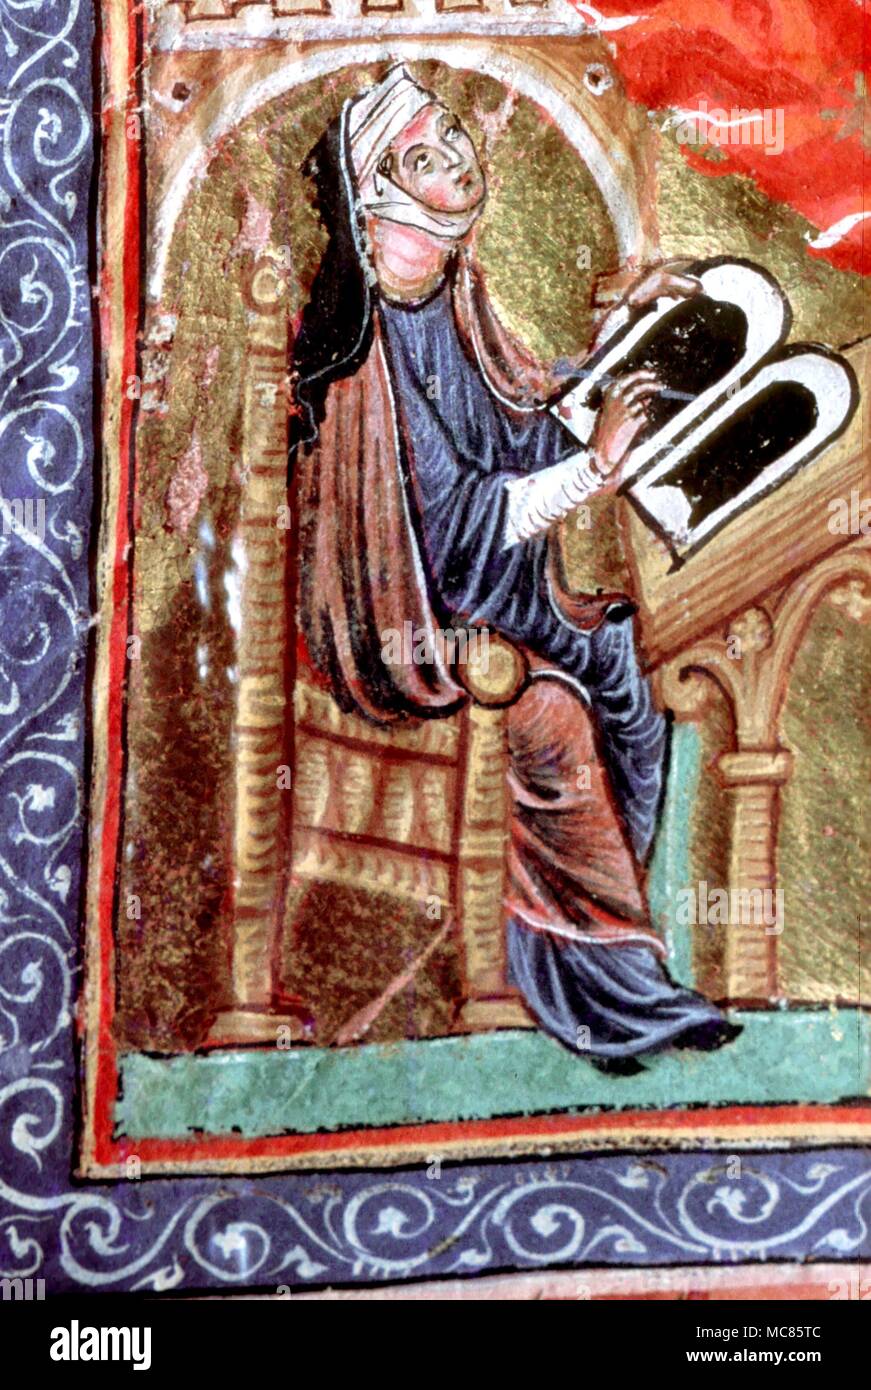 Christian The 13th century Abbess, Hildegarde of Bingen, authoress of books on herbalism and divine visions. Here she is portrayed in prayer Stock Photo